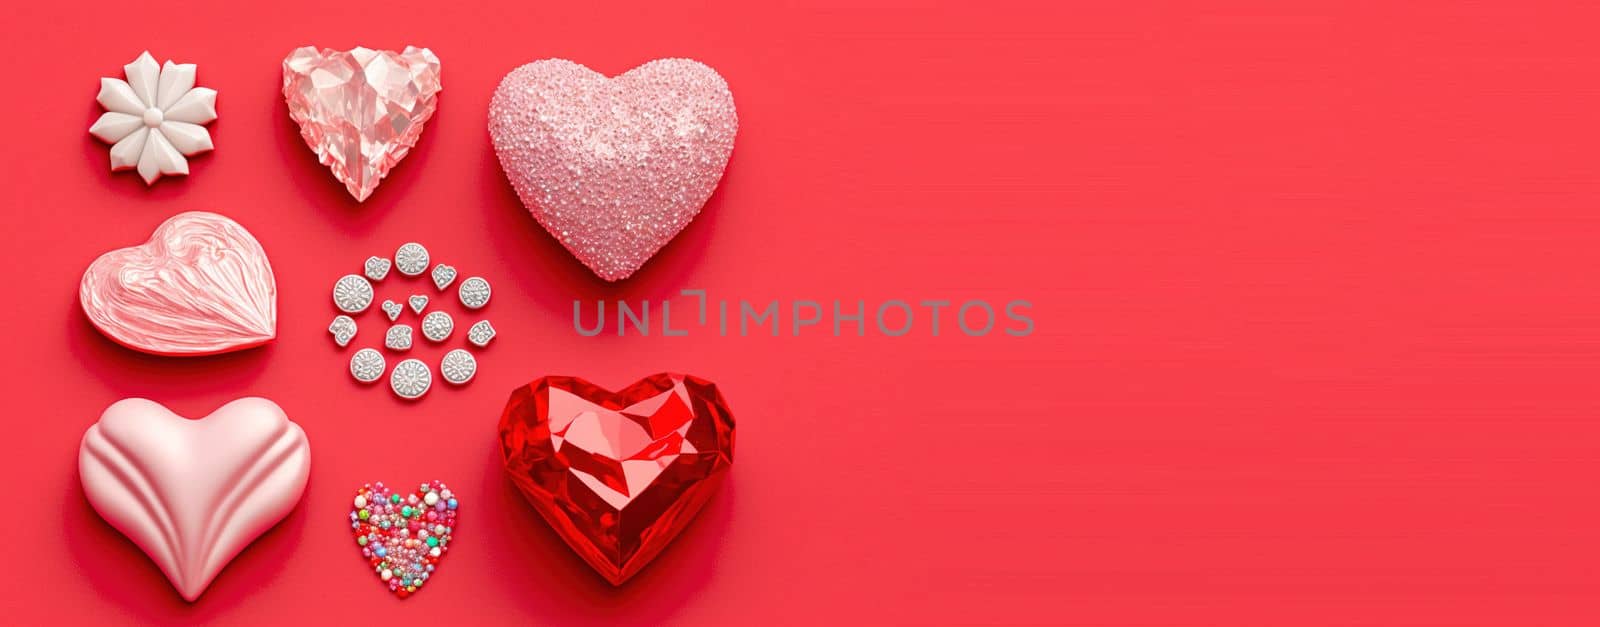 Valentine's Day Sparkle Hearts Diamonds and Crystals Banner and Background by templator